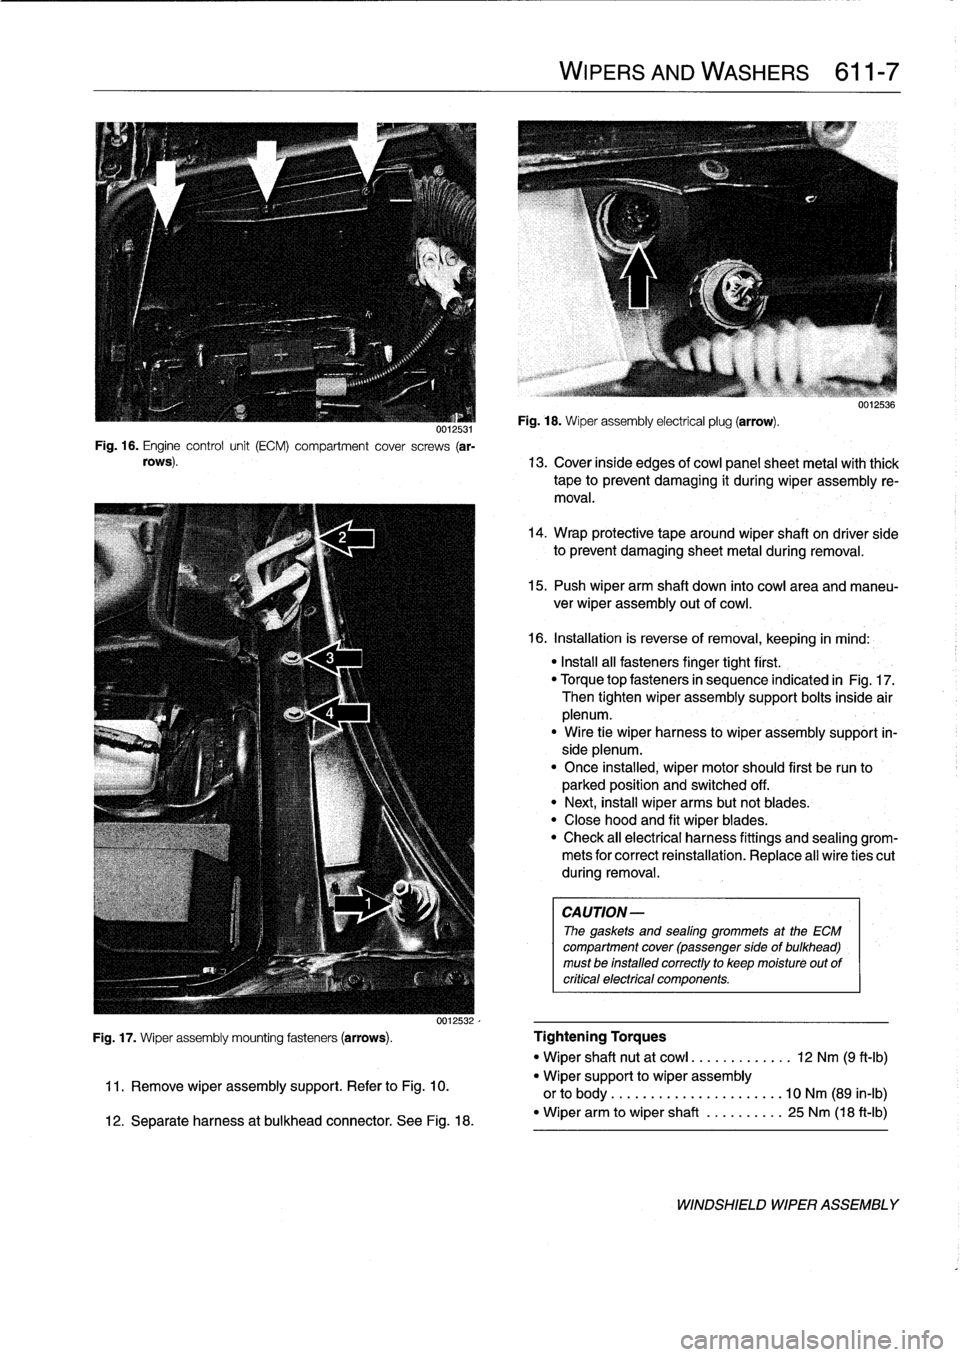 BMW 323i 1995 E36 User Guide 
0012531Fig
.
16
.
Engine
control
unit
(ECM)
compartment
cover
screws
(ar-
rows)
.

WIPERS
AND
WASHERS

	

611-
7

Fig
.
18
.
Wiper
assembly
electrical
plug
(arrow)
.

uu1zbs6

13
.
Cover
inside
edges